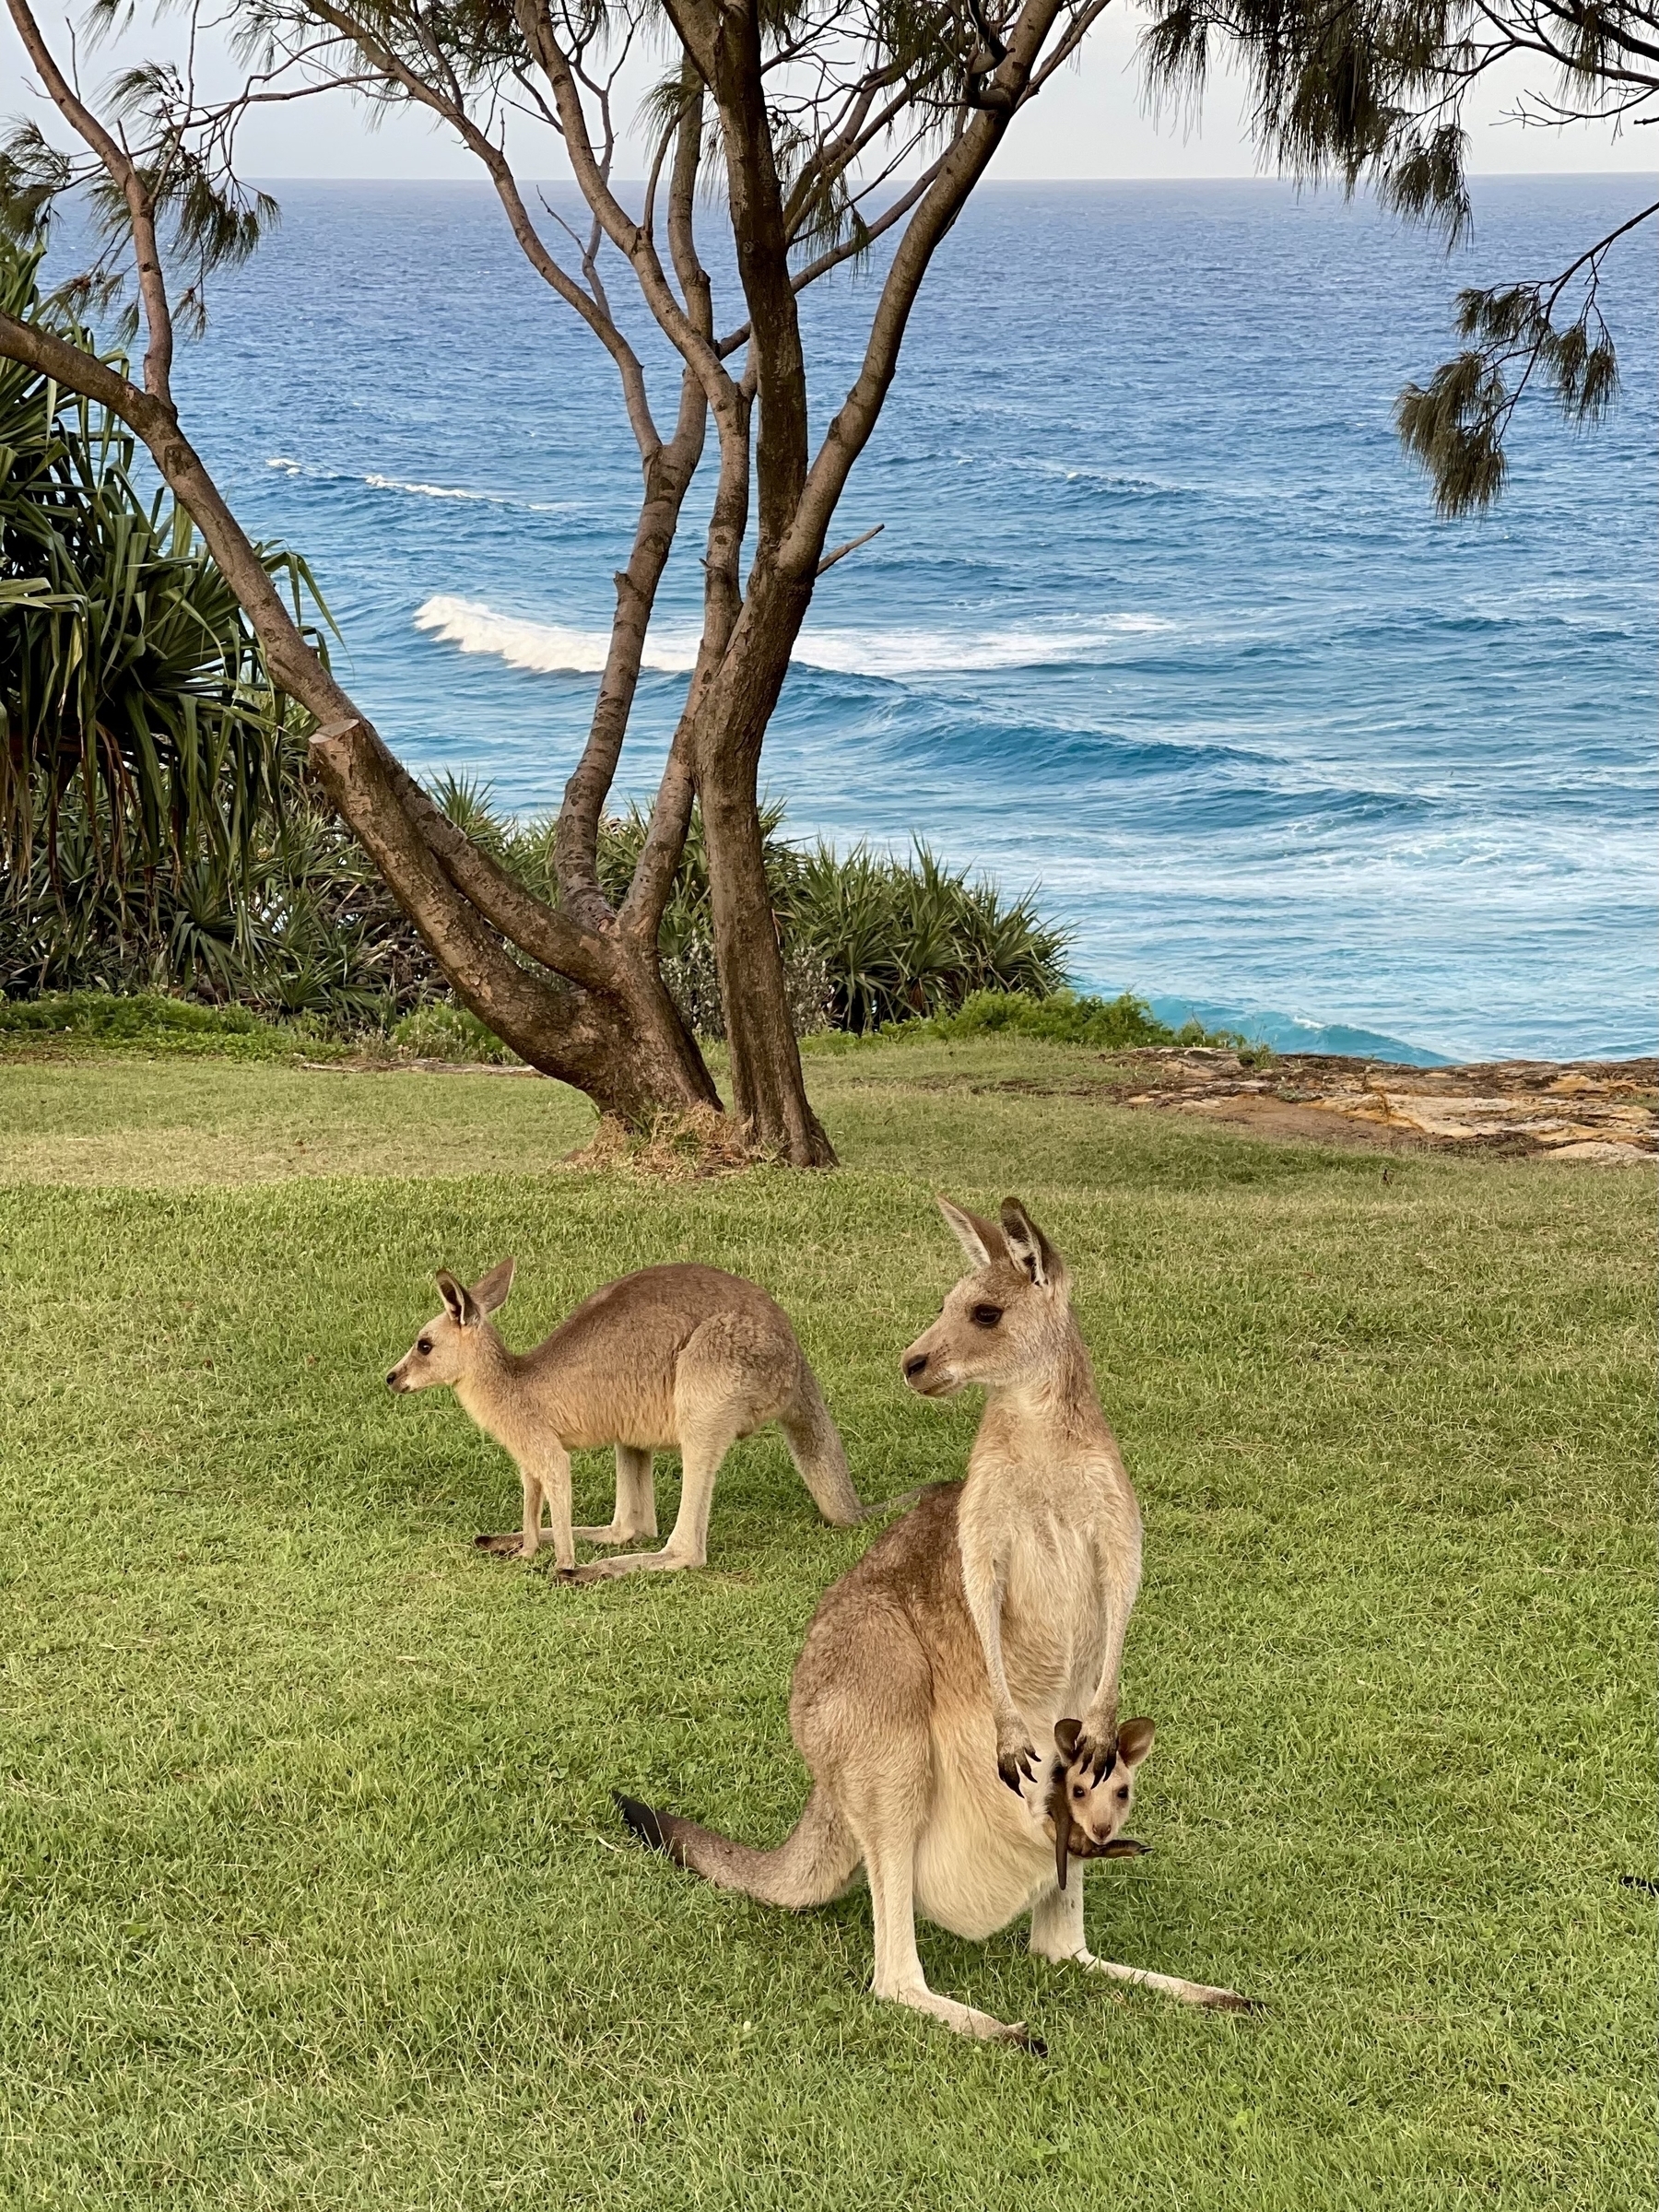 Eastern Grey Kangaroos relaxing on a grassy bluff overlooking the ocean. A joey rests in its mother's pouch while she surveys the scene. Behind them another grazes on the rich grass.